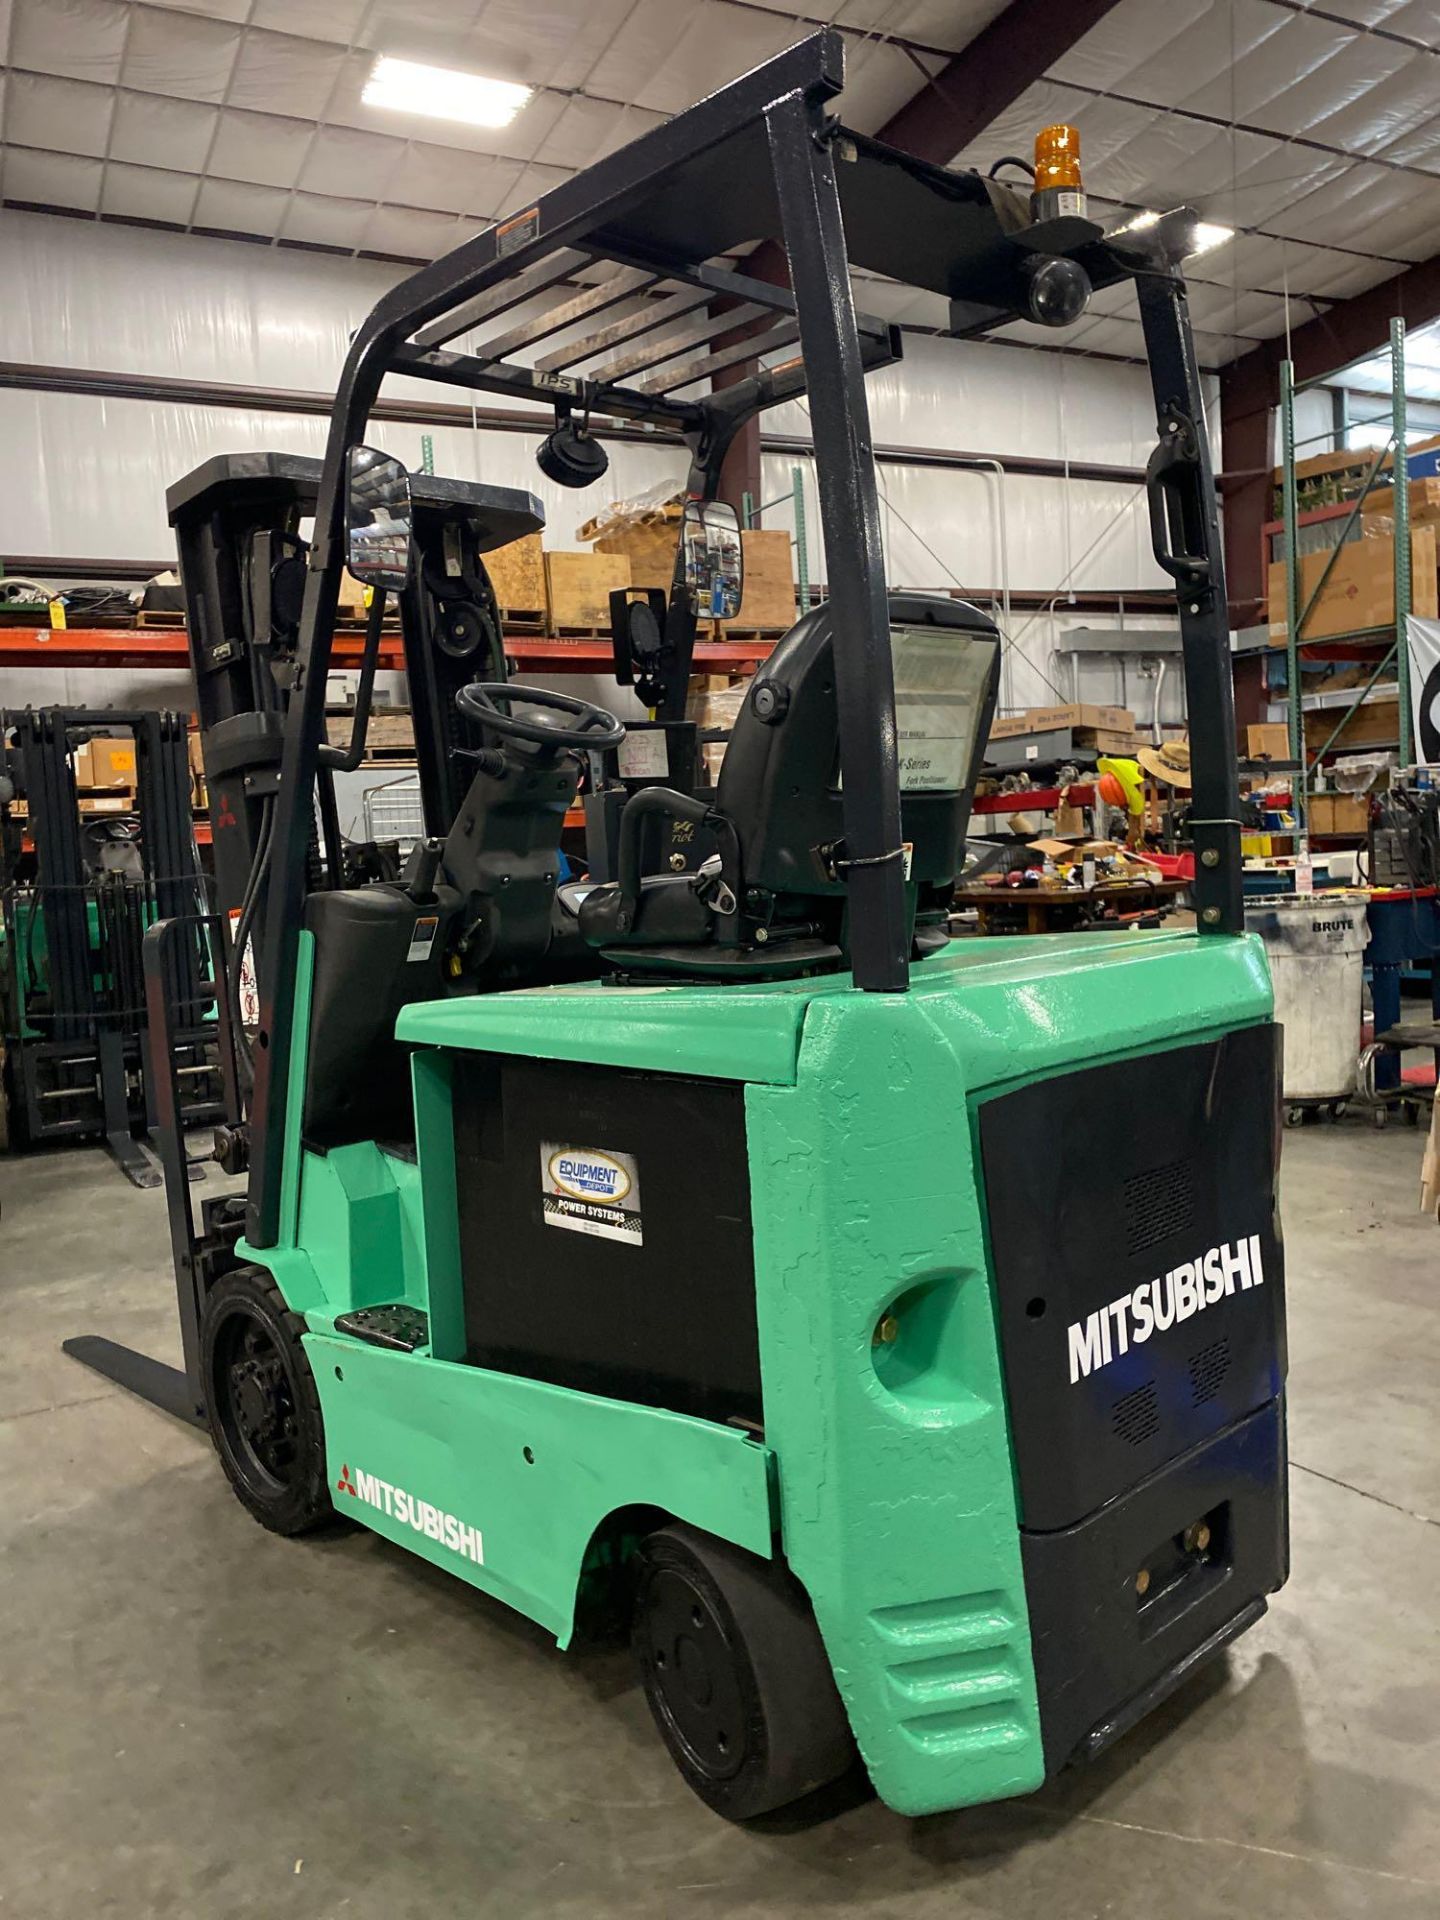 2016 MITSUBISHI FBC25N2 ELECTRIC FORKLIFT, APPROX. 4,500 LB CAPACITY - Image 6 of 12